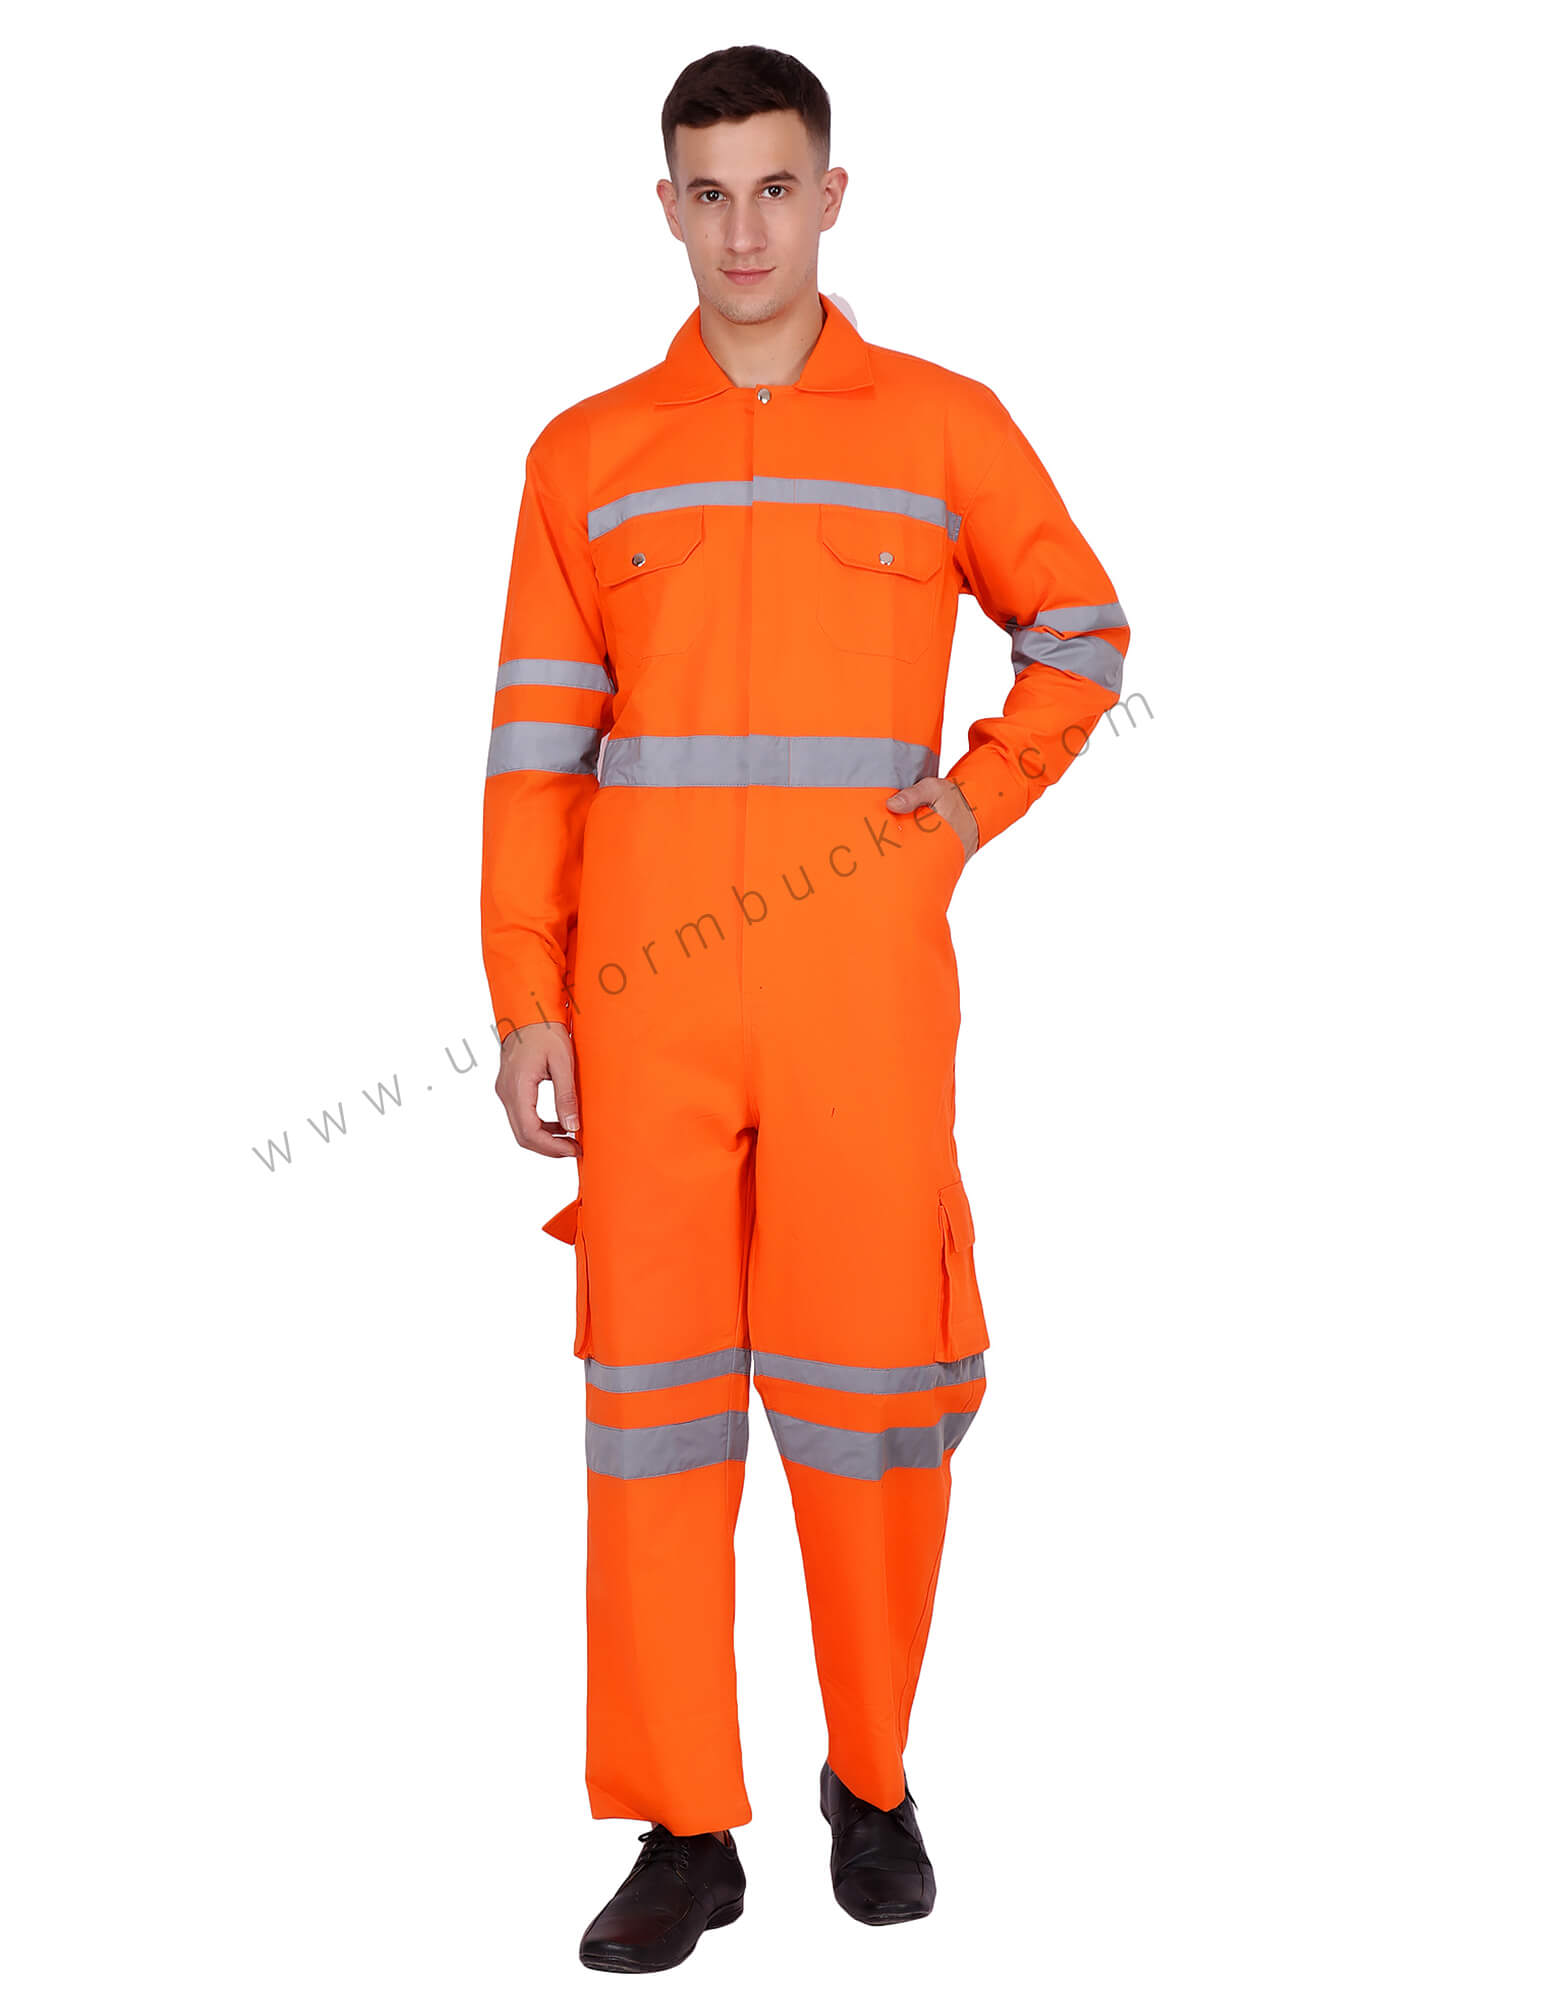 https://www.uniformbucket.com/img/product/original/high-visibility-orange-overall-with-functional-pockets_1.jpg